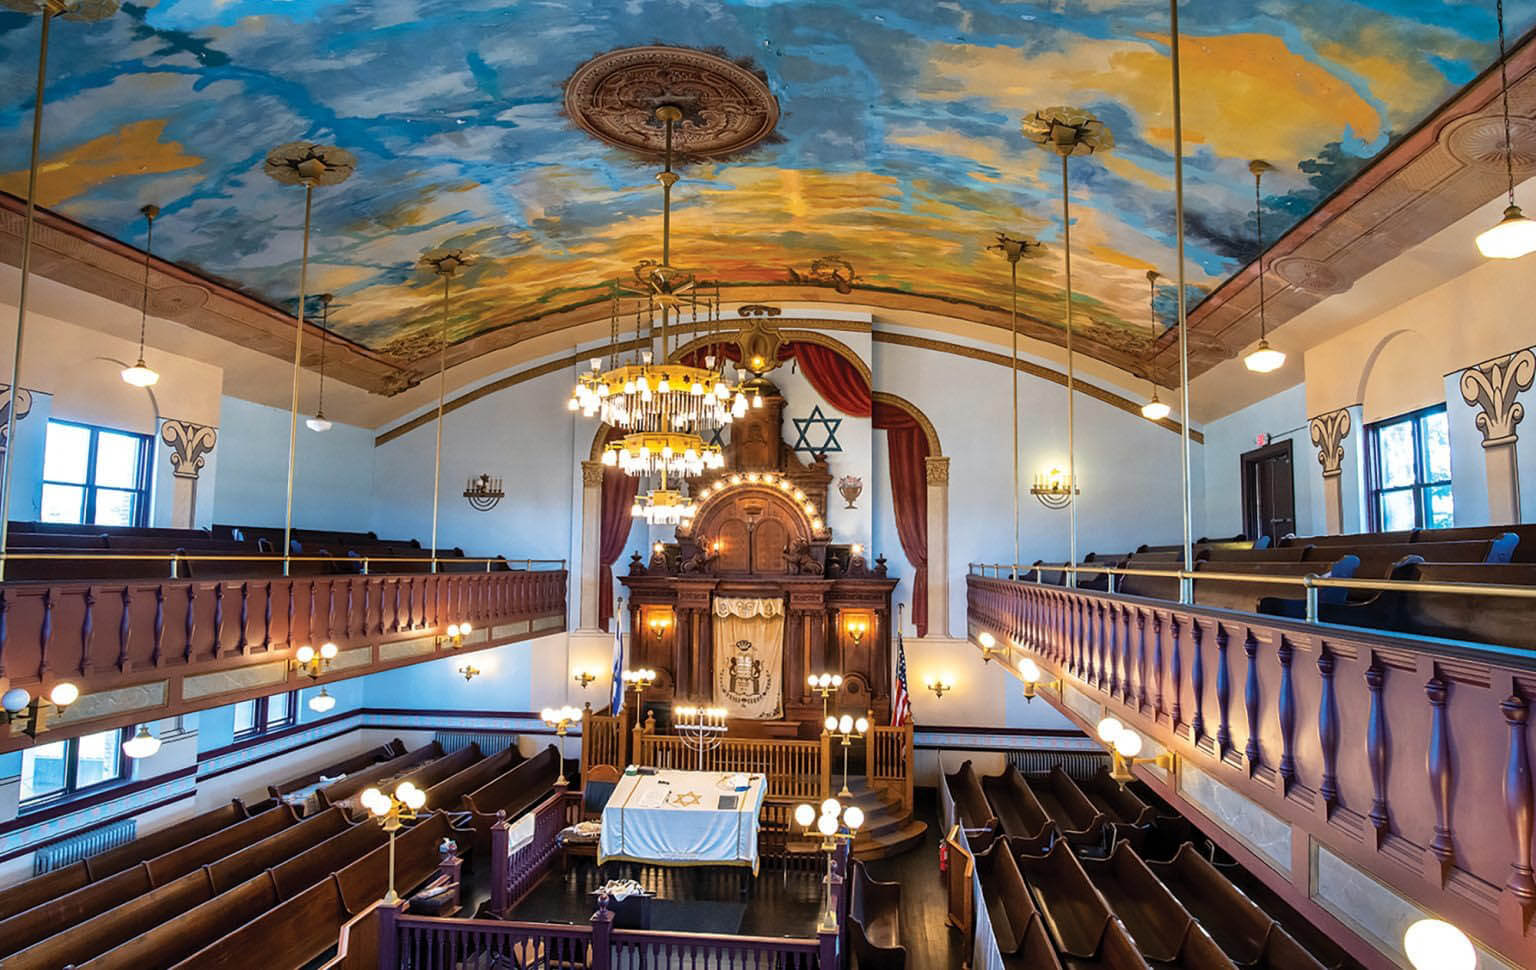 Walnut Street Shul, known as the 'Queen of Shuls' with its hand-painted fresco, was built by Lithuanian Jews in 1909.